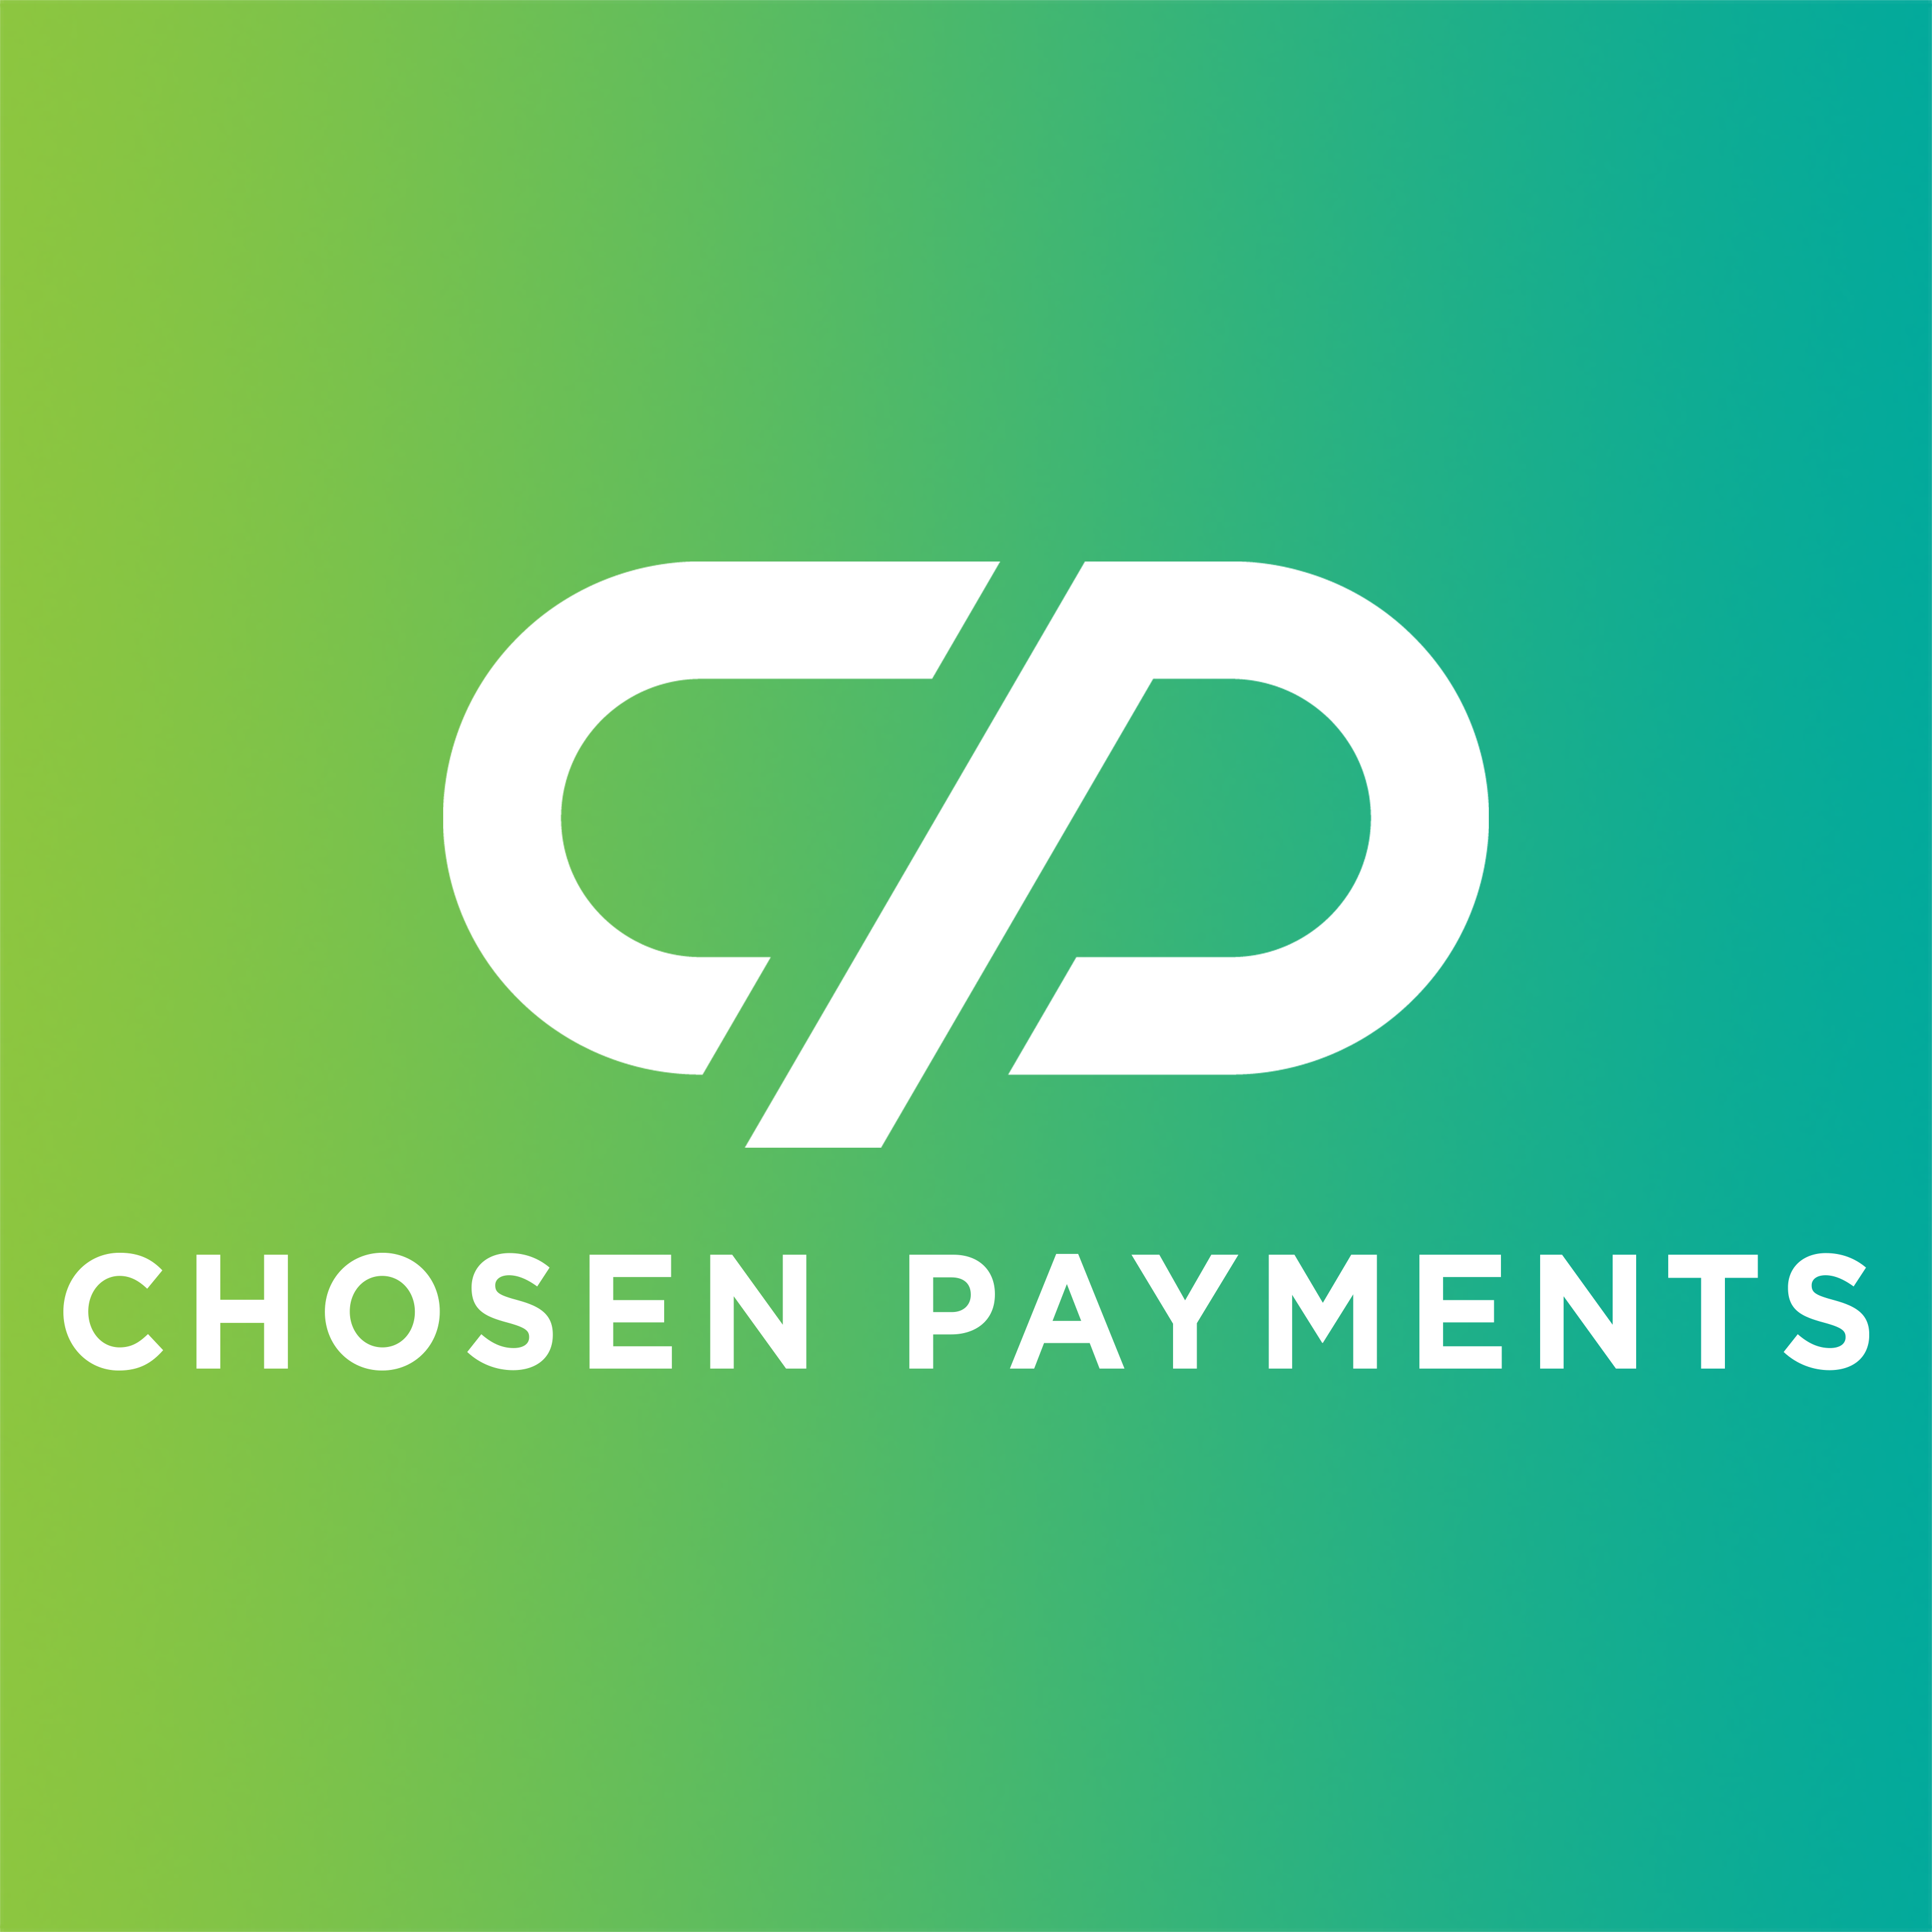 Chosen Payments - A National Credit Card processing company specializing in discounted credit card processing for trade association members.